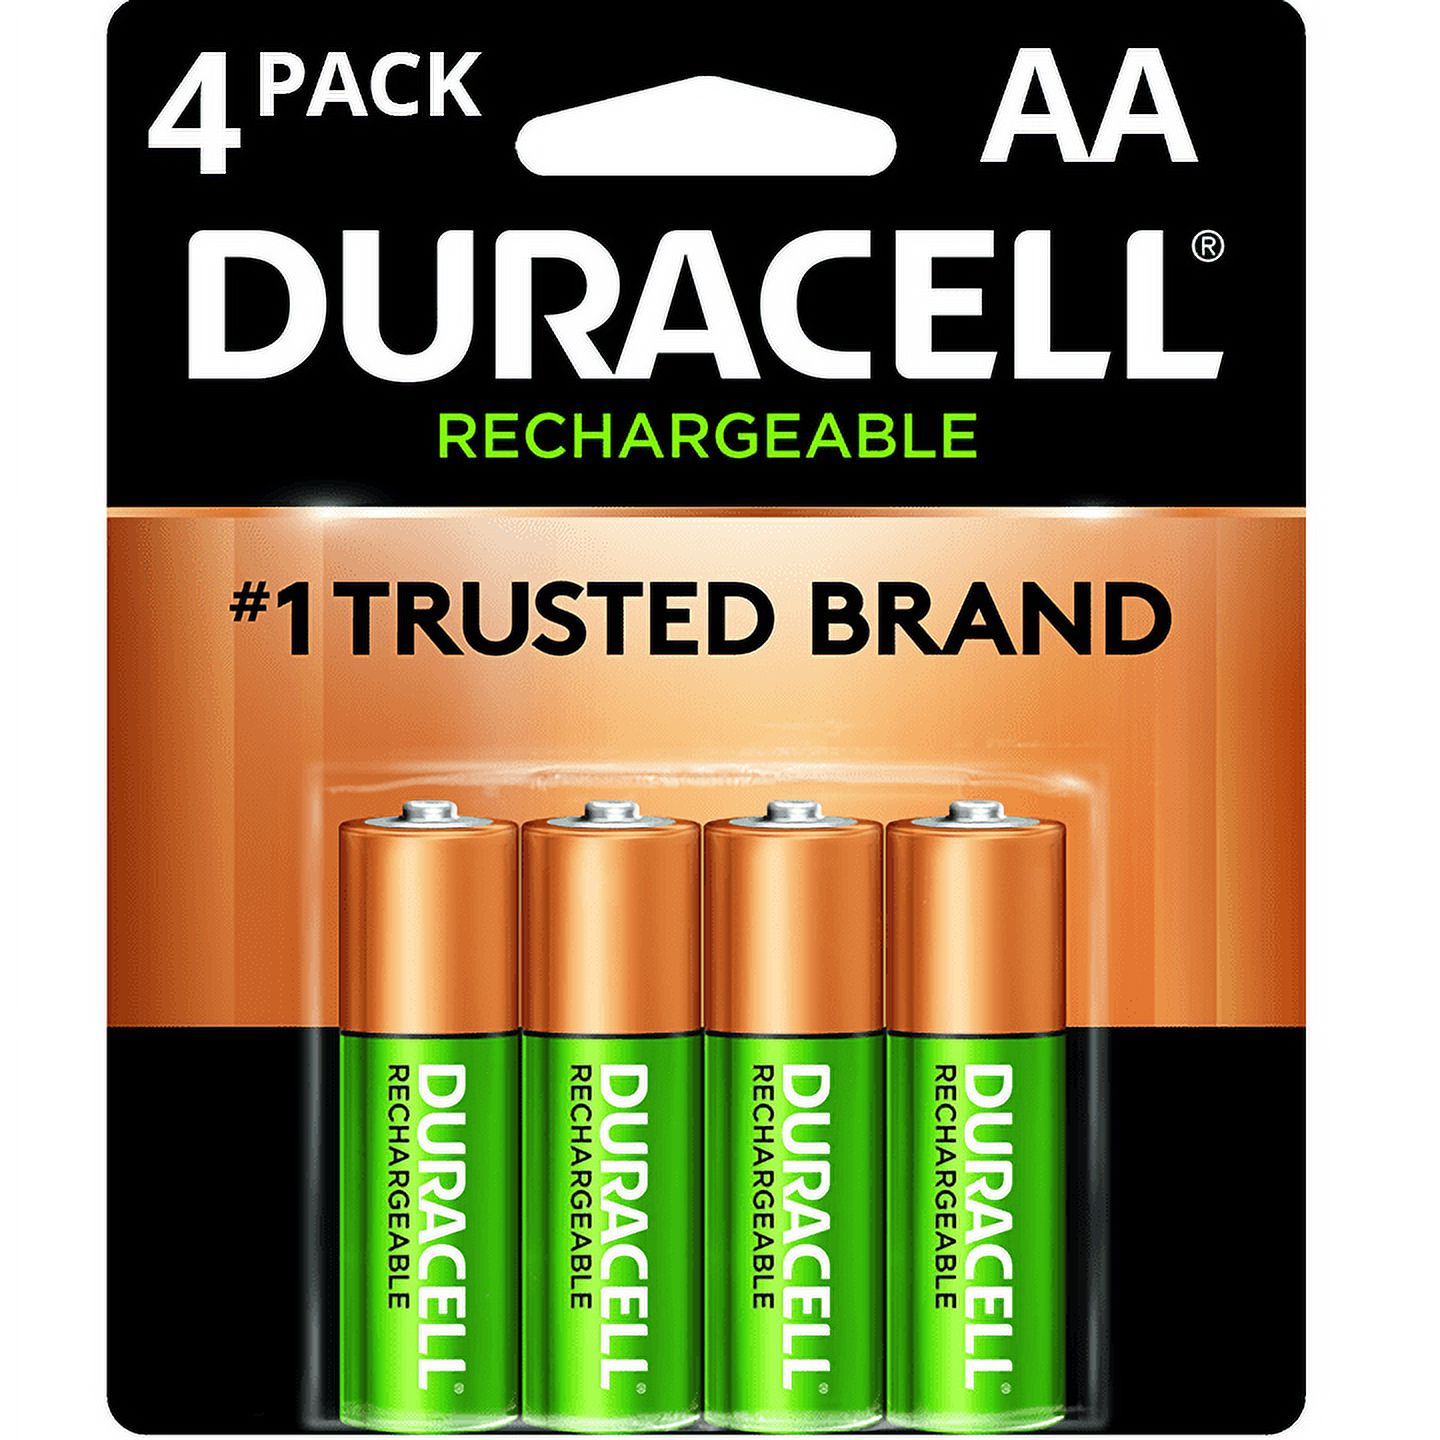 Duracell DX1500B4N Rechargeable Staycharged Nimh Batteries, Aa, 4/pack - image 1 of 7